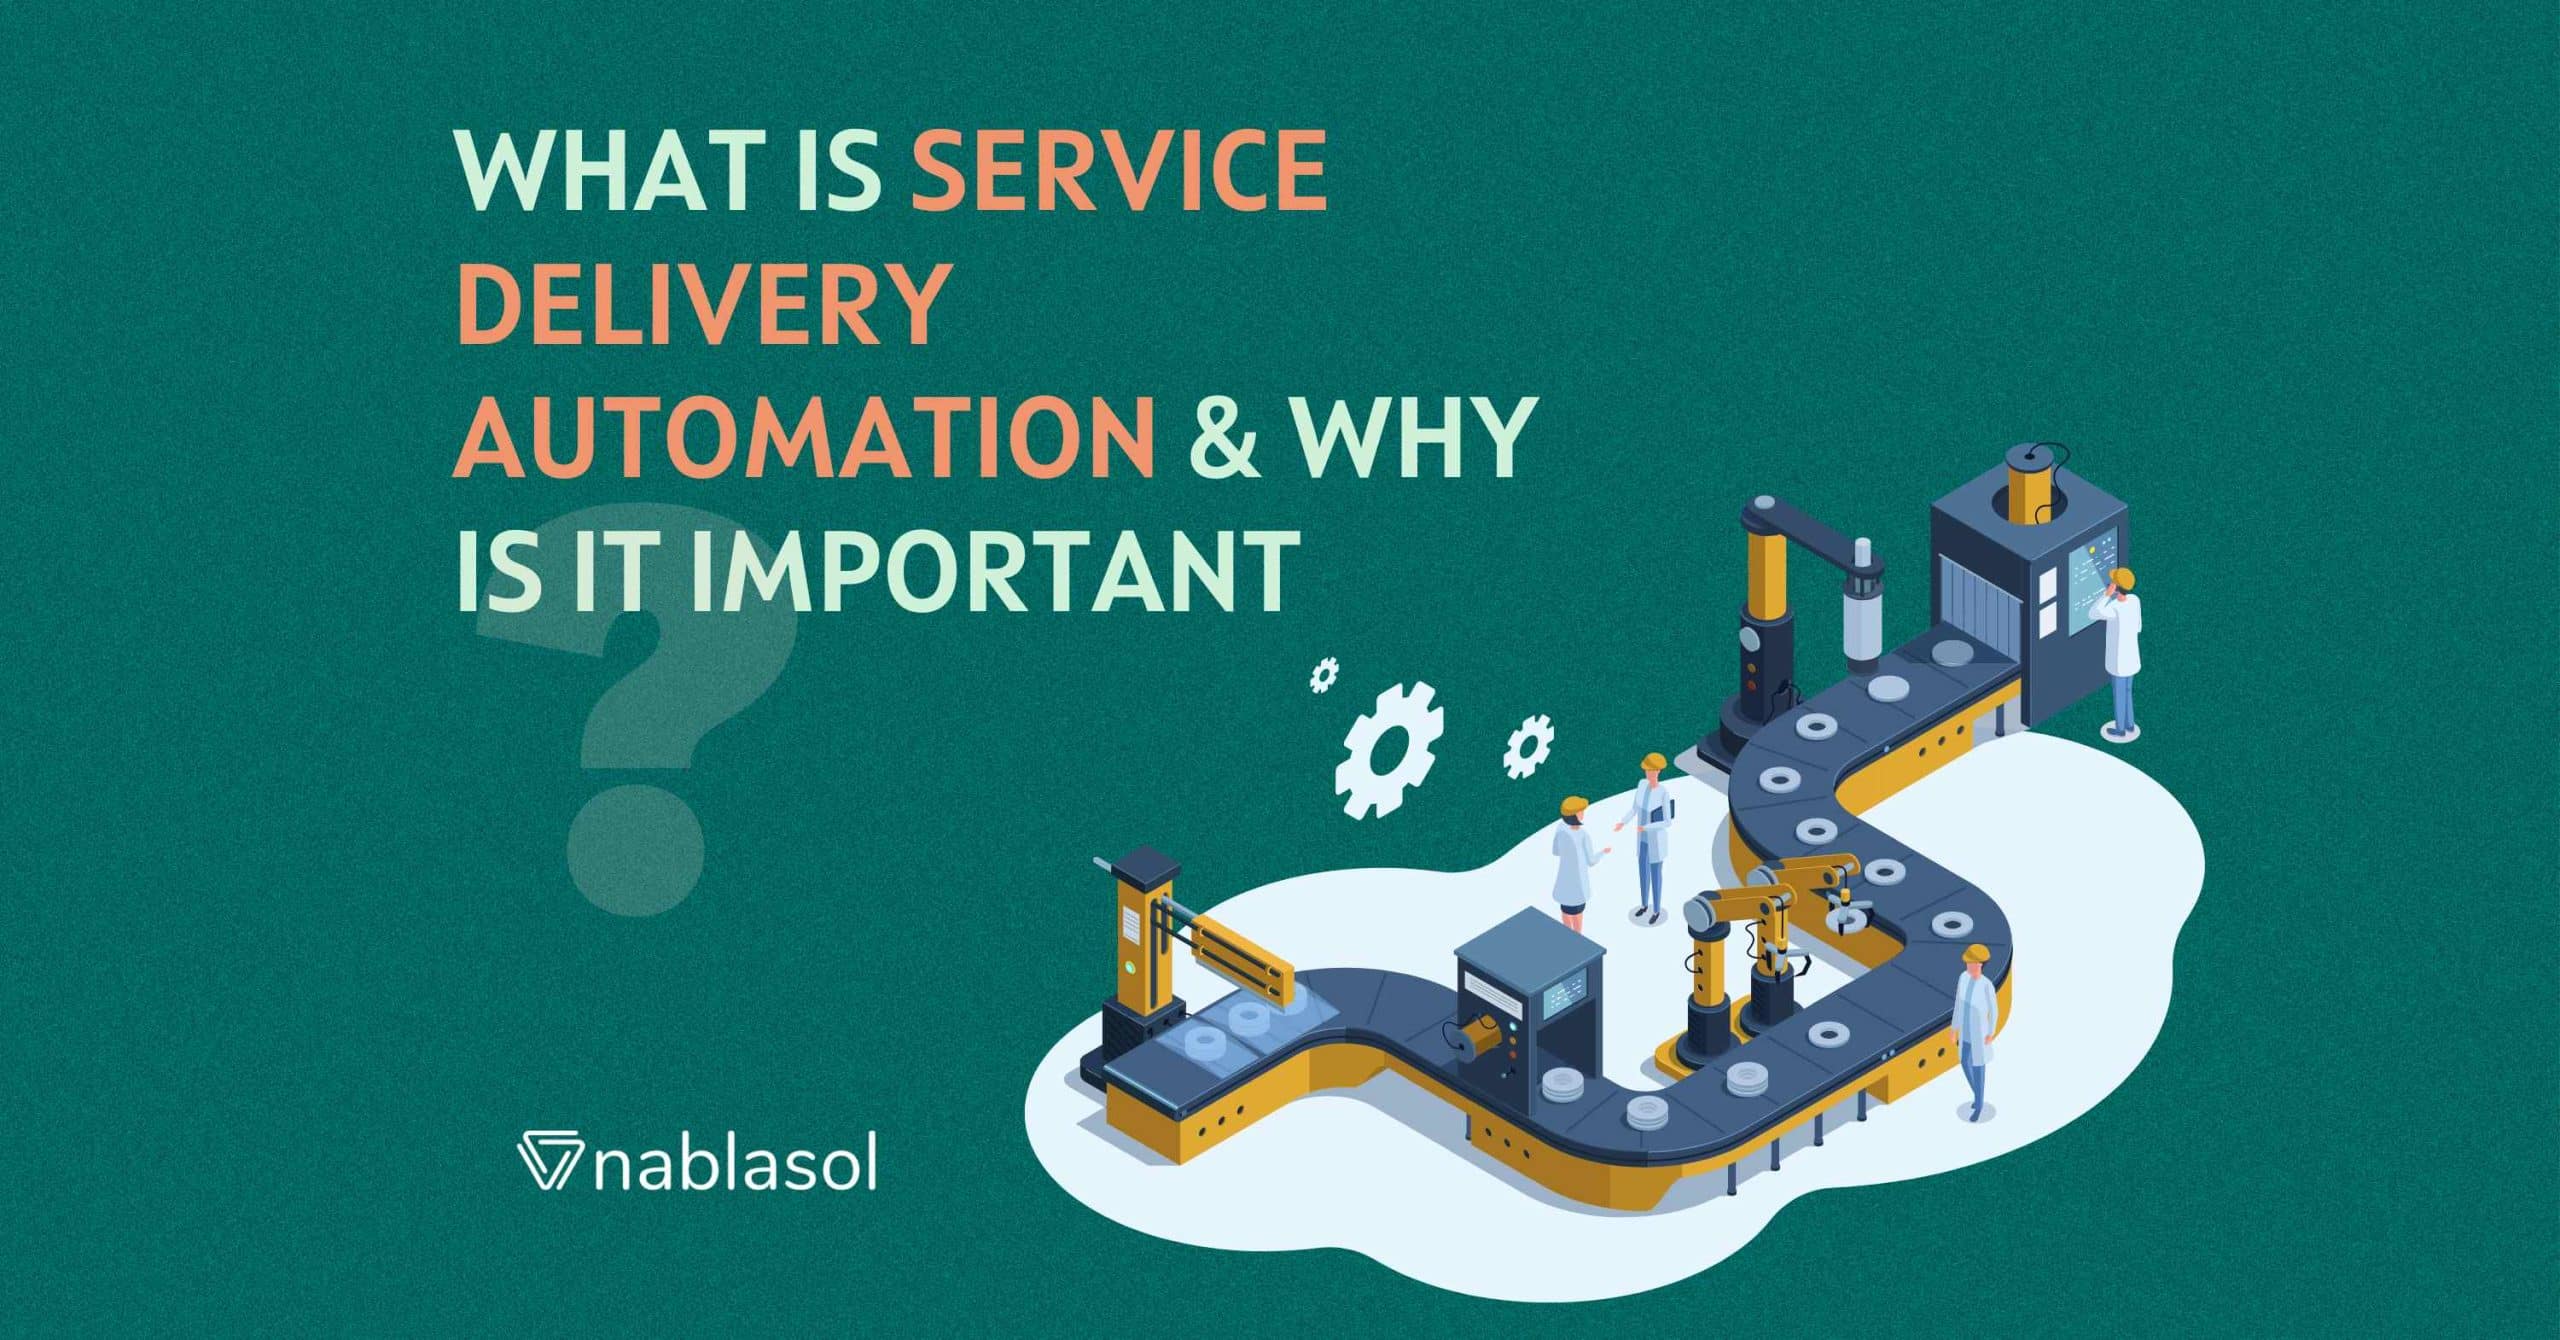 What Is Service Delivery Automation & Why Is it Important?